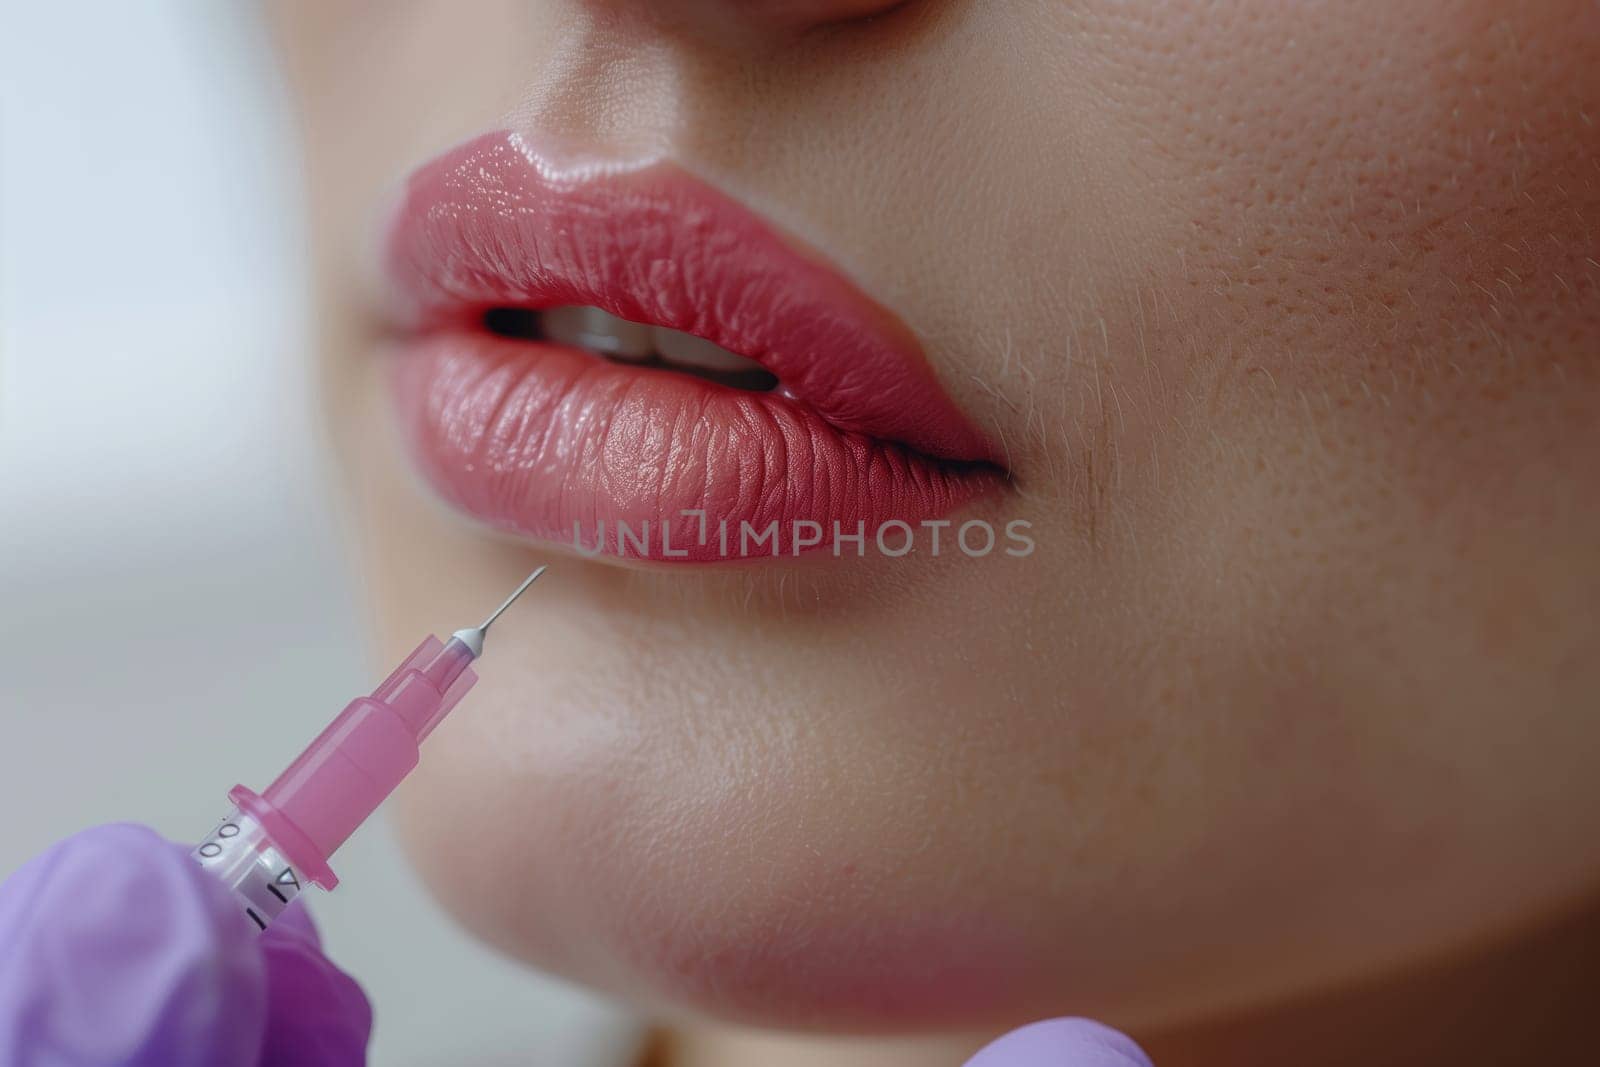 A woman is getting botox injection on her lips for pinker pout by richwolf